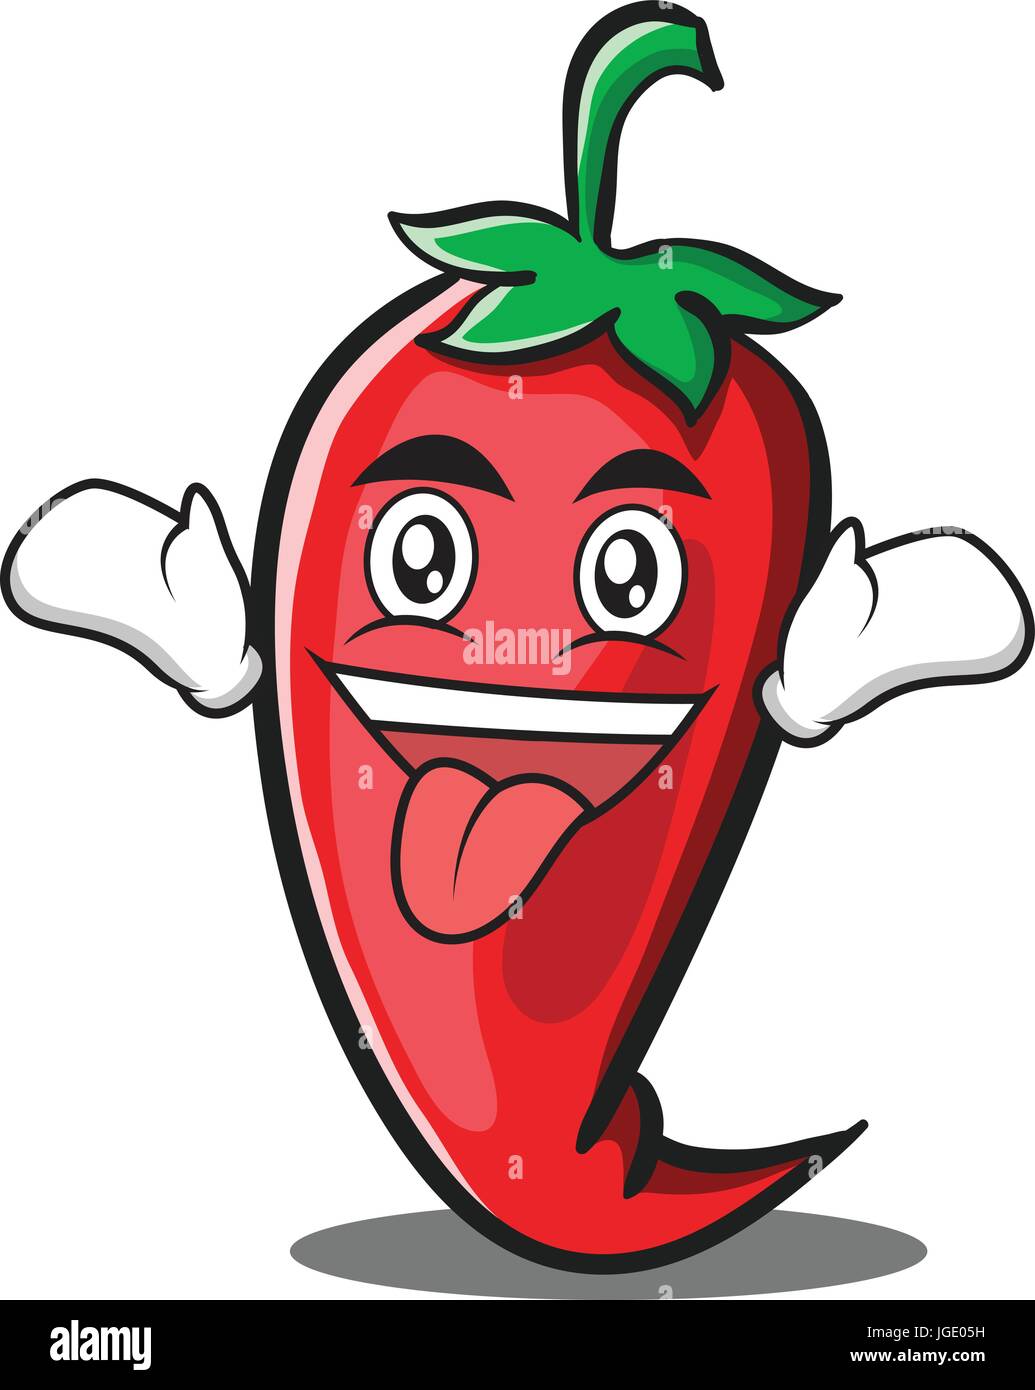 Crazy red chili character cartoon Stock Vector